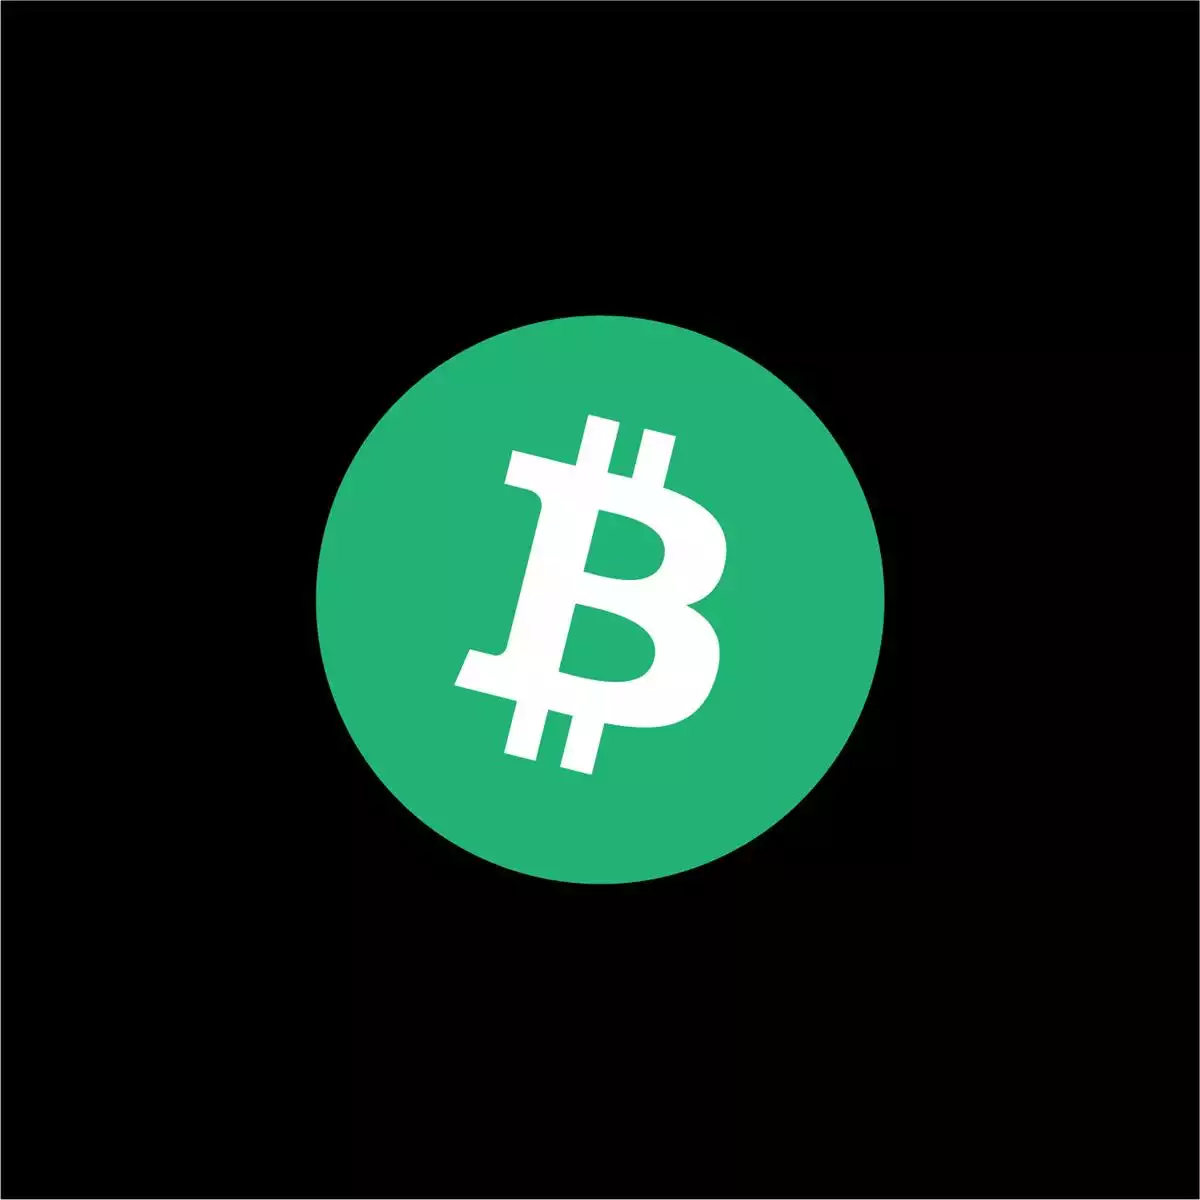 ainslie bitcoin cash (bch)please note - this is bitcoin cash (bch) not bitcoin (btc)bitcoin cash (bch) arose from a bitcoin hard fork (a blockchain sp...